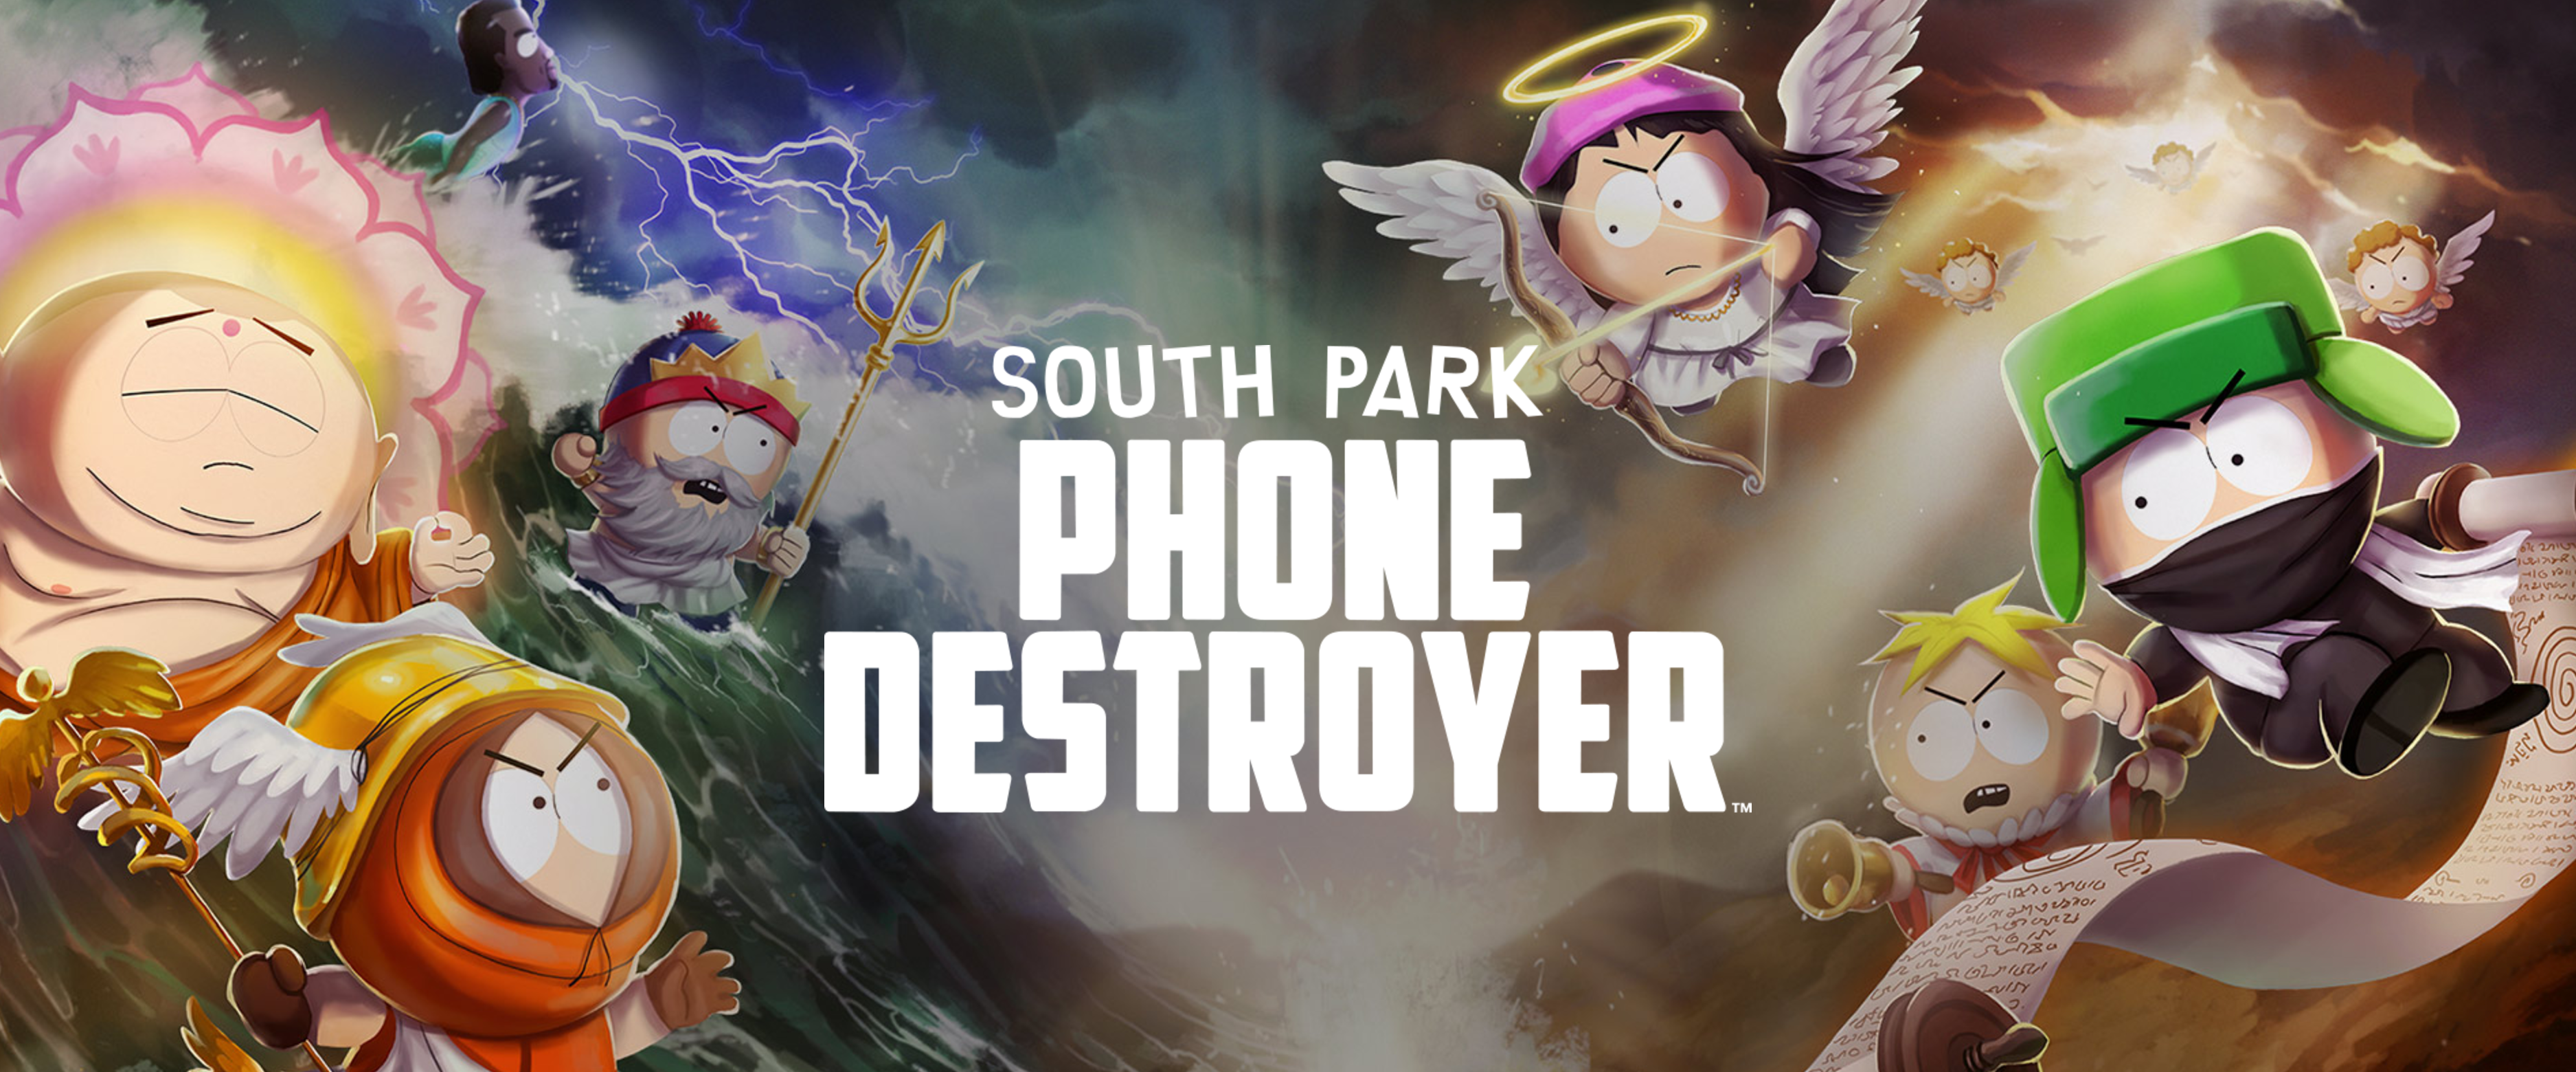 Download Value Rainbow  South Park Phone Destroyer Inuit Kenny PNG Image  with No Background  PNGkeycom